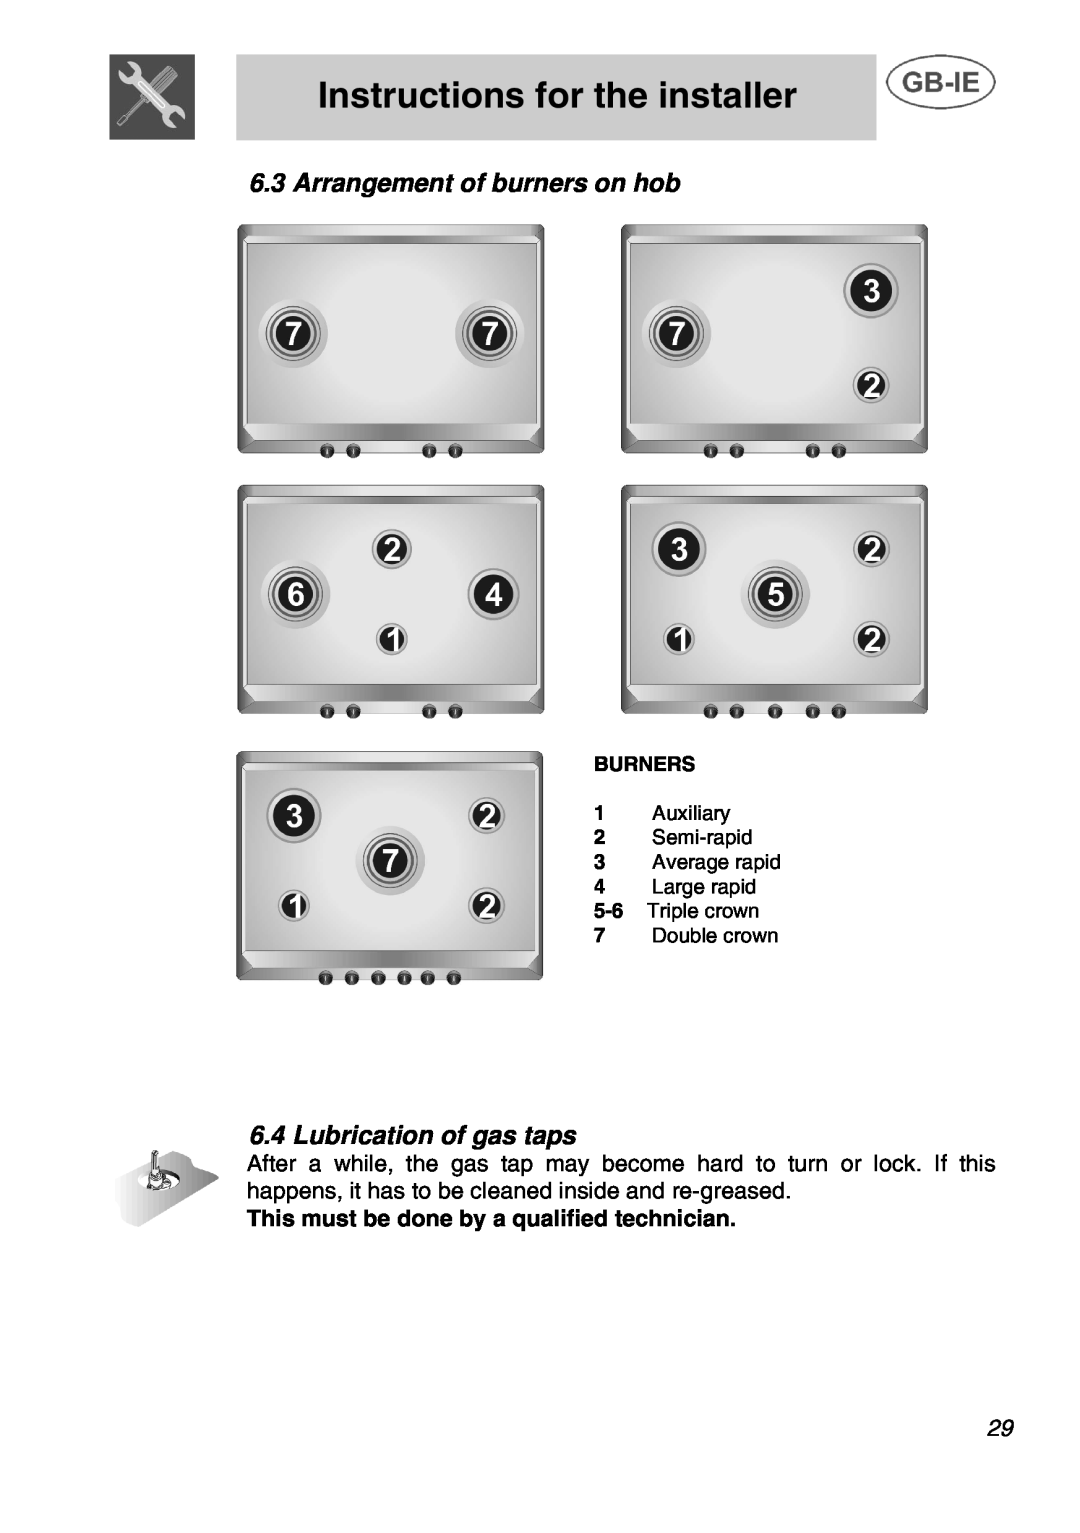 Bosch Appliances NCT 675 N Arrangement of burners on hob, Lubrication of gas taps, Instructions for the installer, Burners 